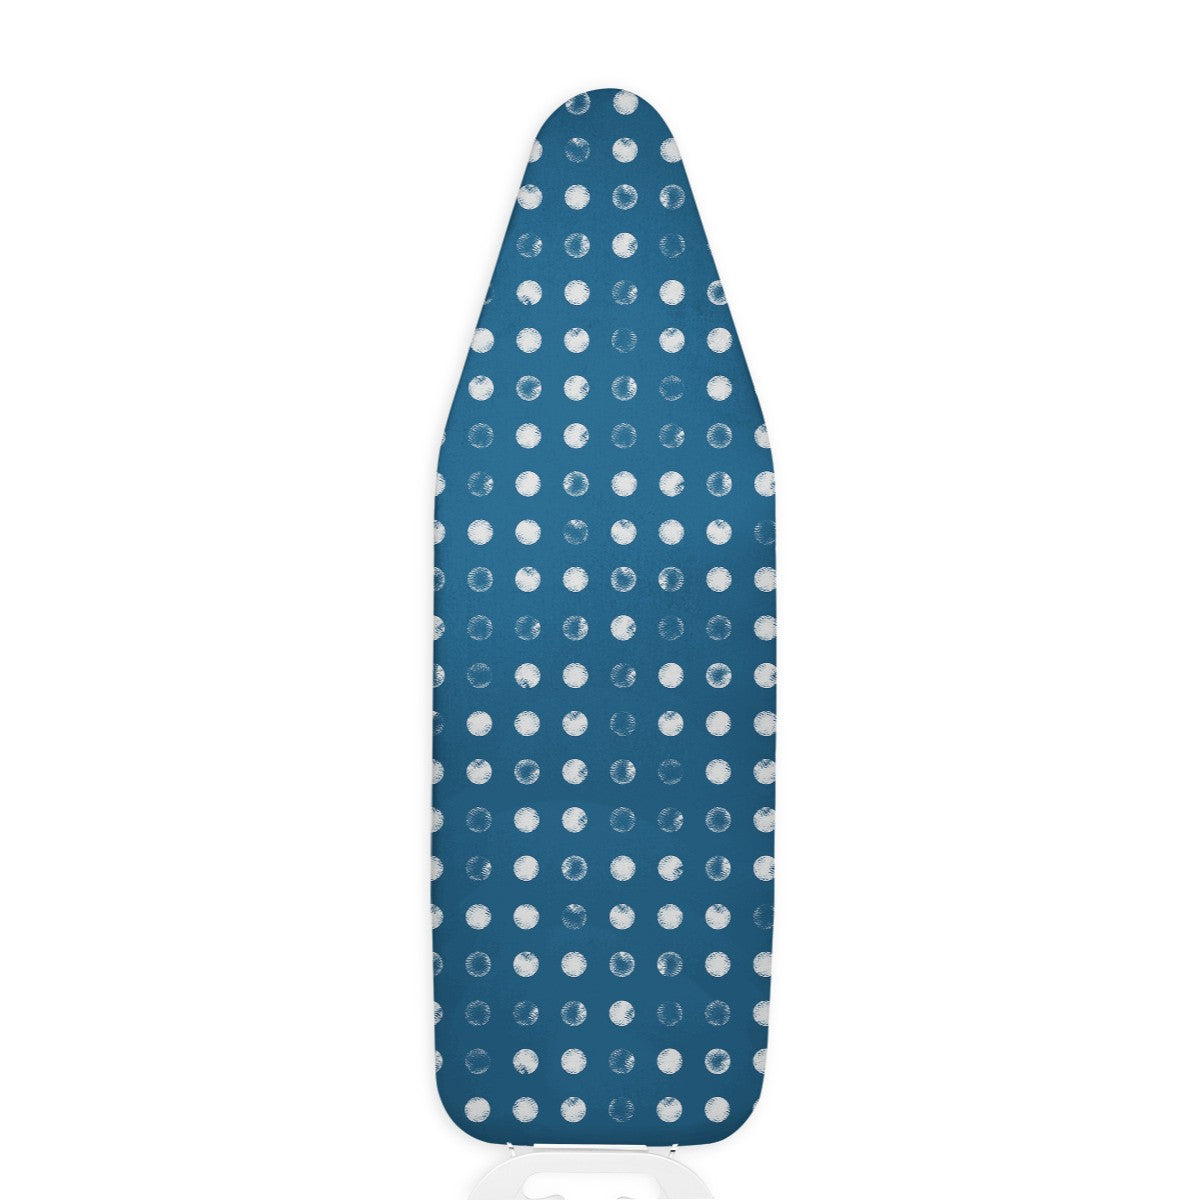 Wool Reversible Fitted Ironing Board Cover - 2 in 1 - One Side Wool One Side Cotton (Fits 54 x 18 Standard Ironing Boards) (Royal Blue)